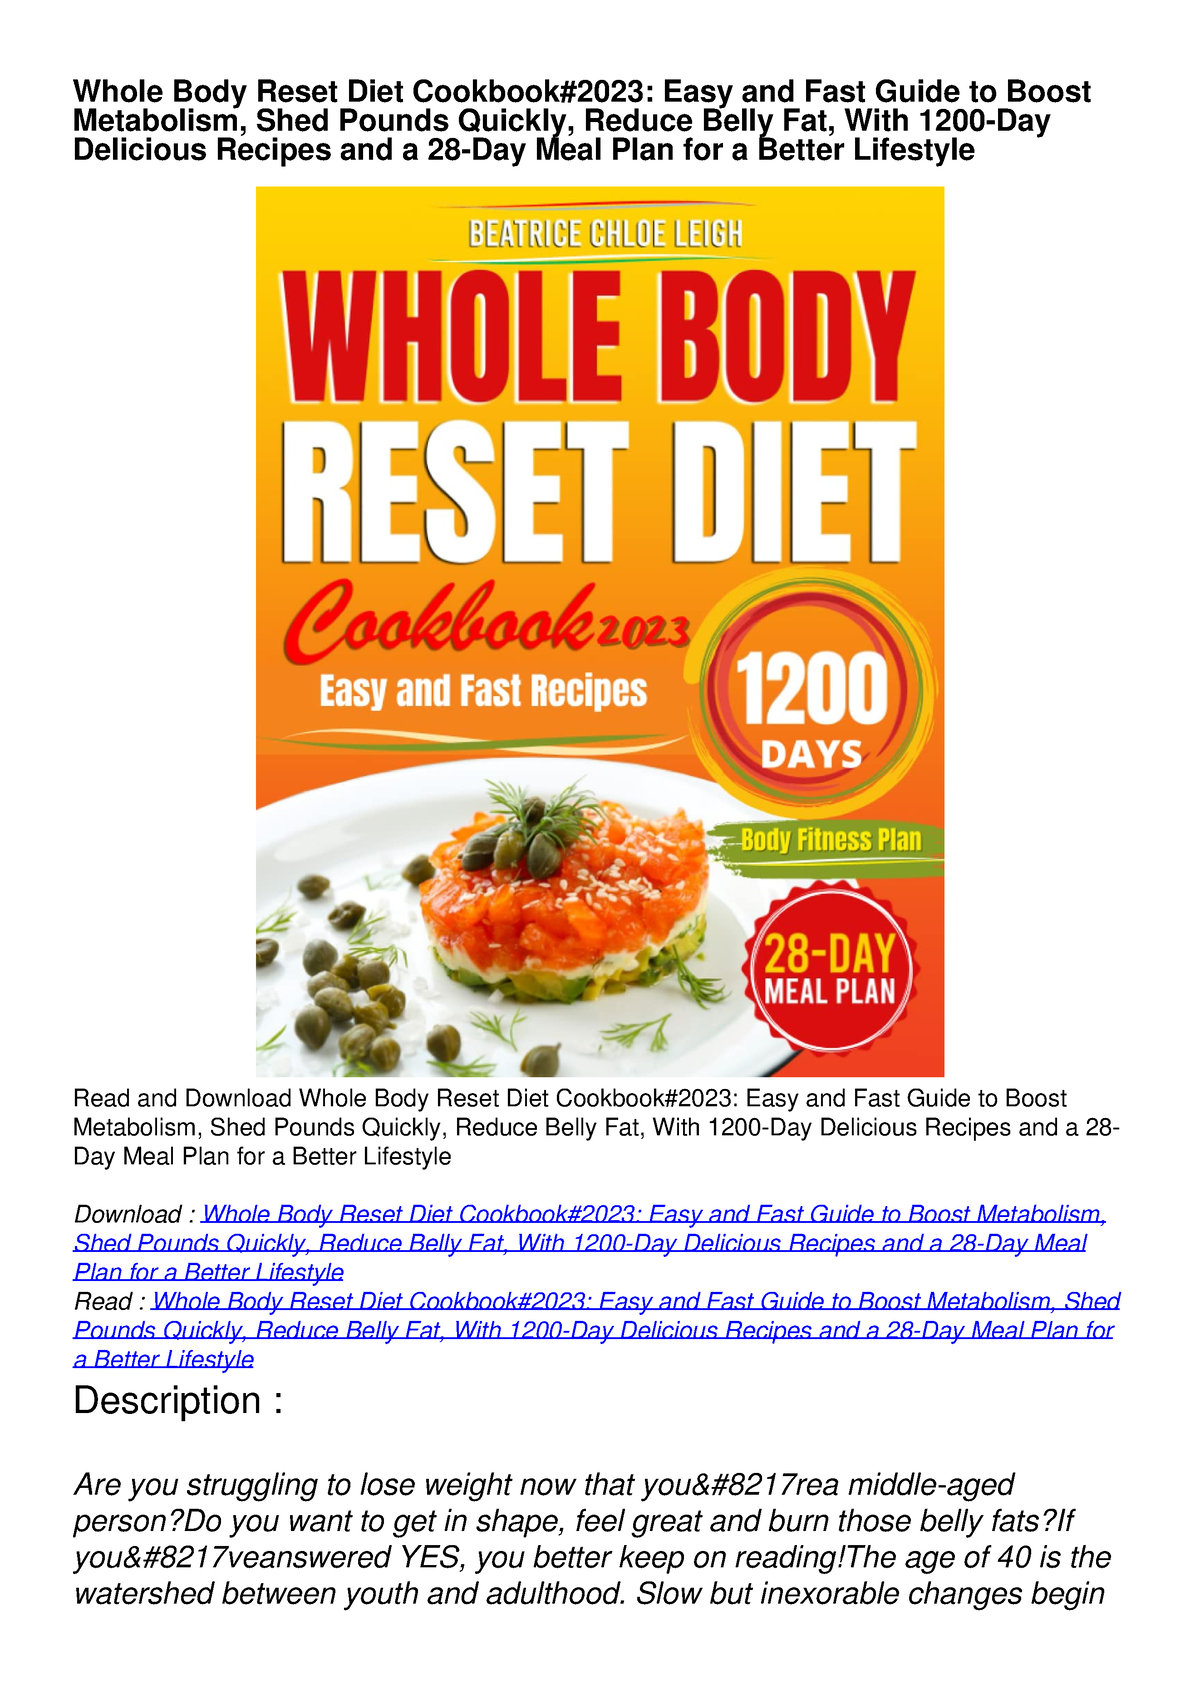 Read Pdf Whole Body Reset Diet Cookbook2023 Easy And Fast Guide To Boost Metabolism Shed